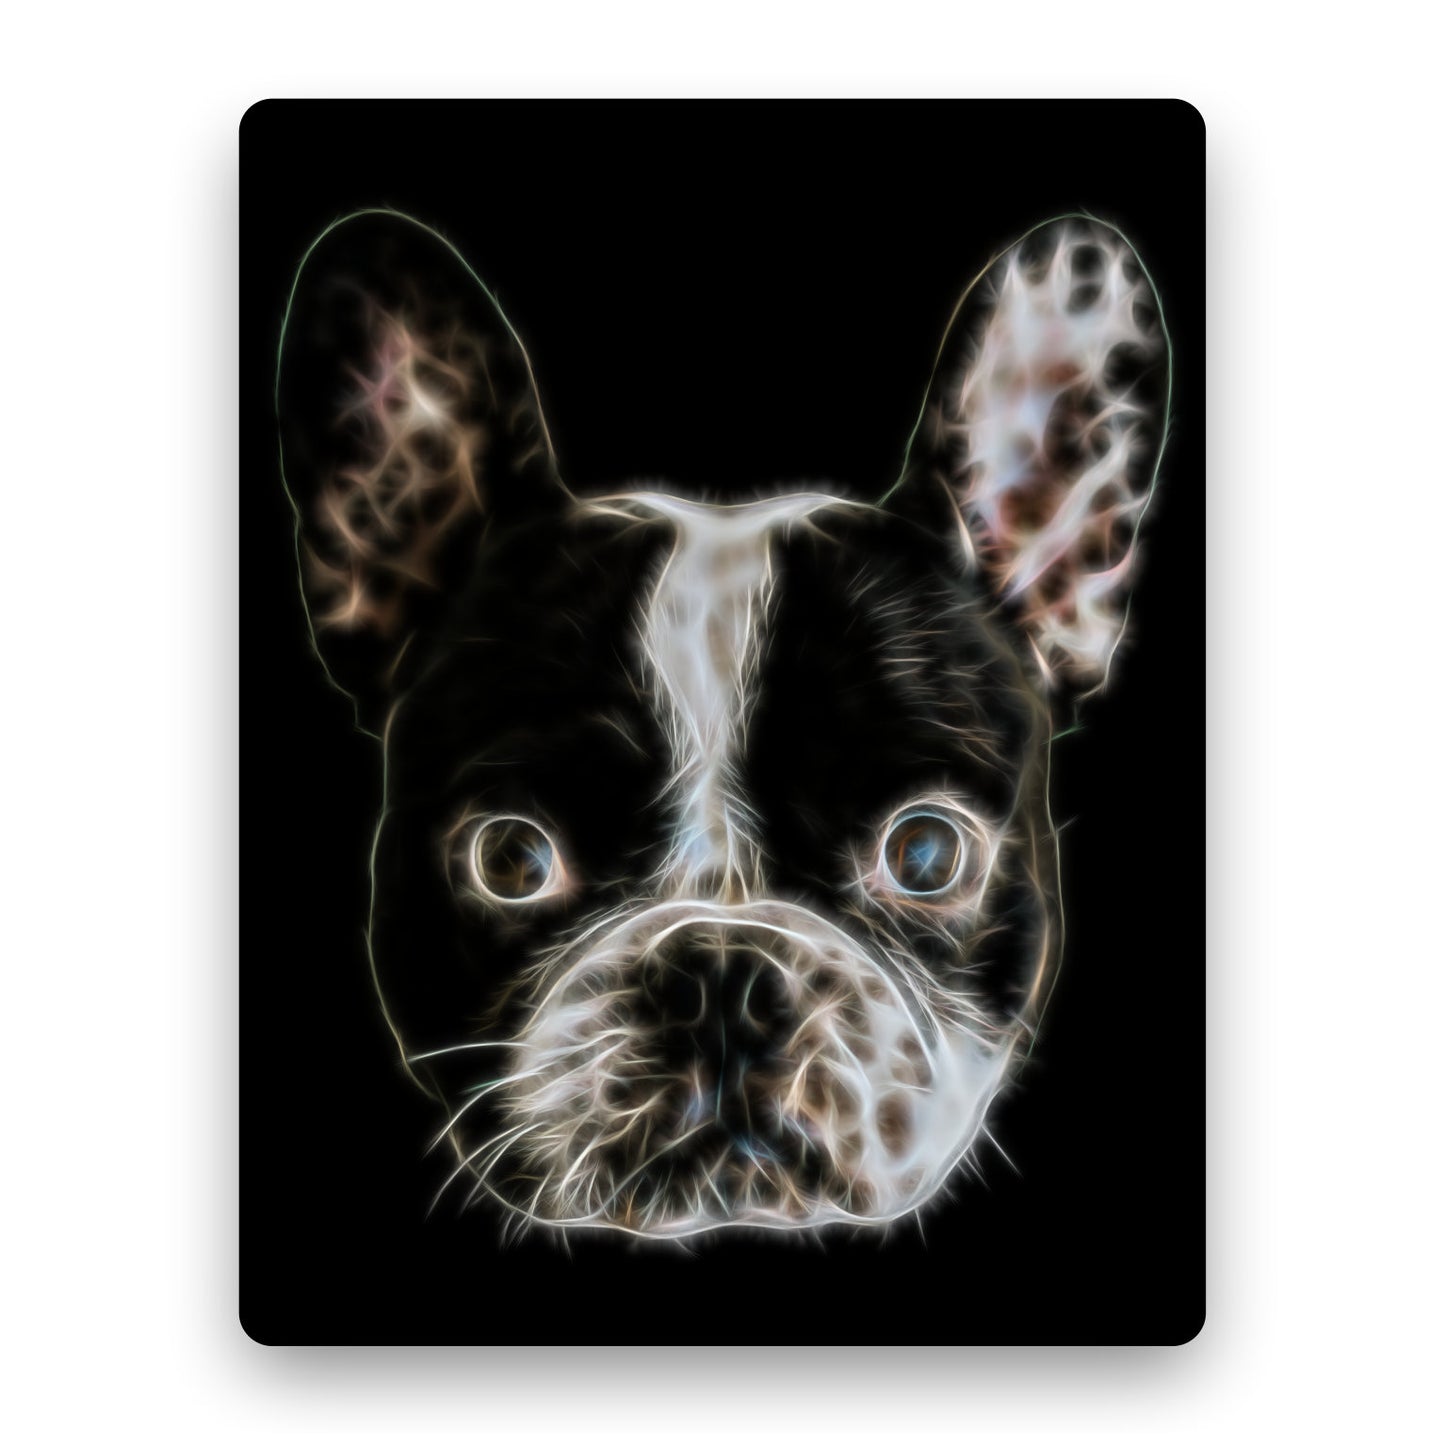 Black and White French Bulldog Metal Wall Plaque with Stunning Fractal Art Design.